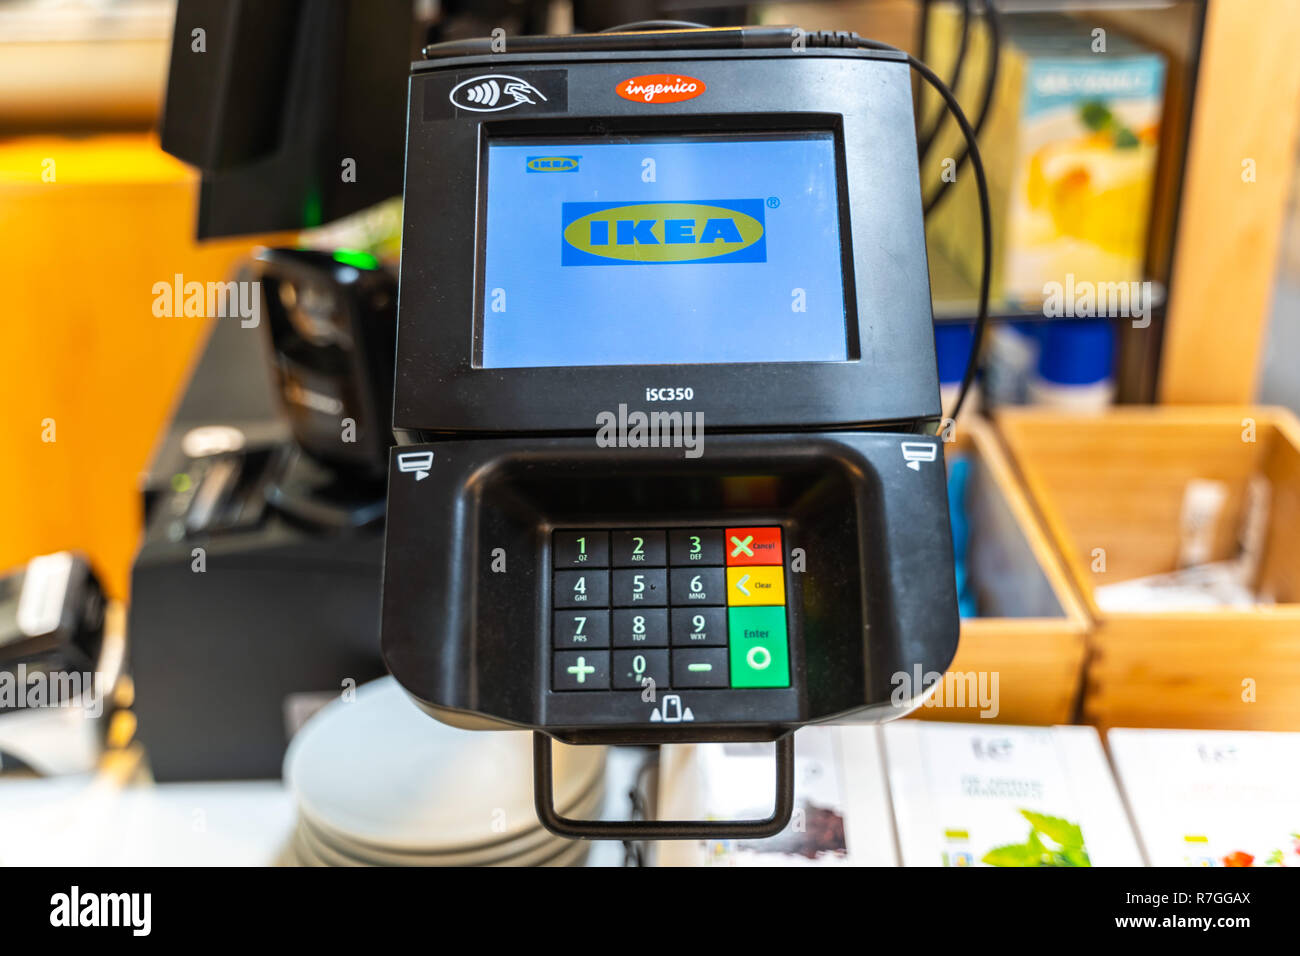 Valencia,Spain - December 09, 2018: Ikea store lot in Alfafar, Valencia.  Credit card paymenet terminal (POS Machine) with Ikea name on the screen.  Co Stock Photo - Alamy